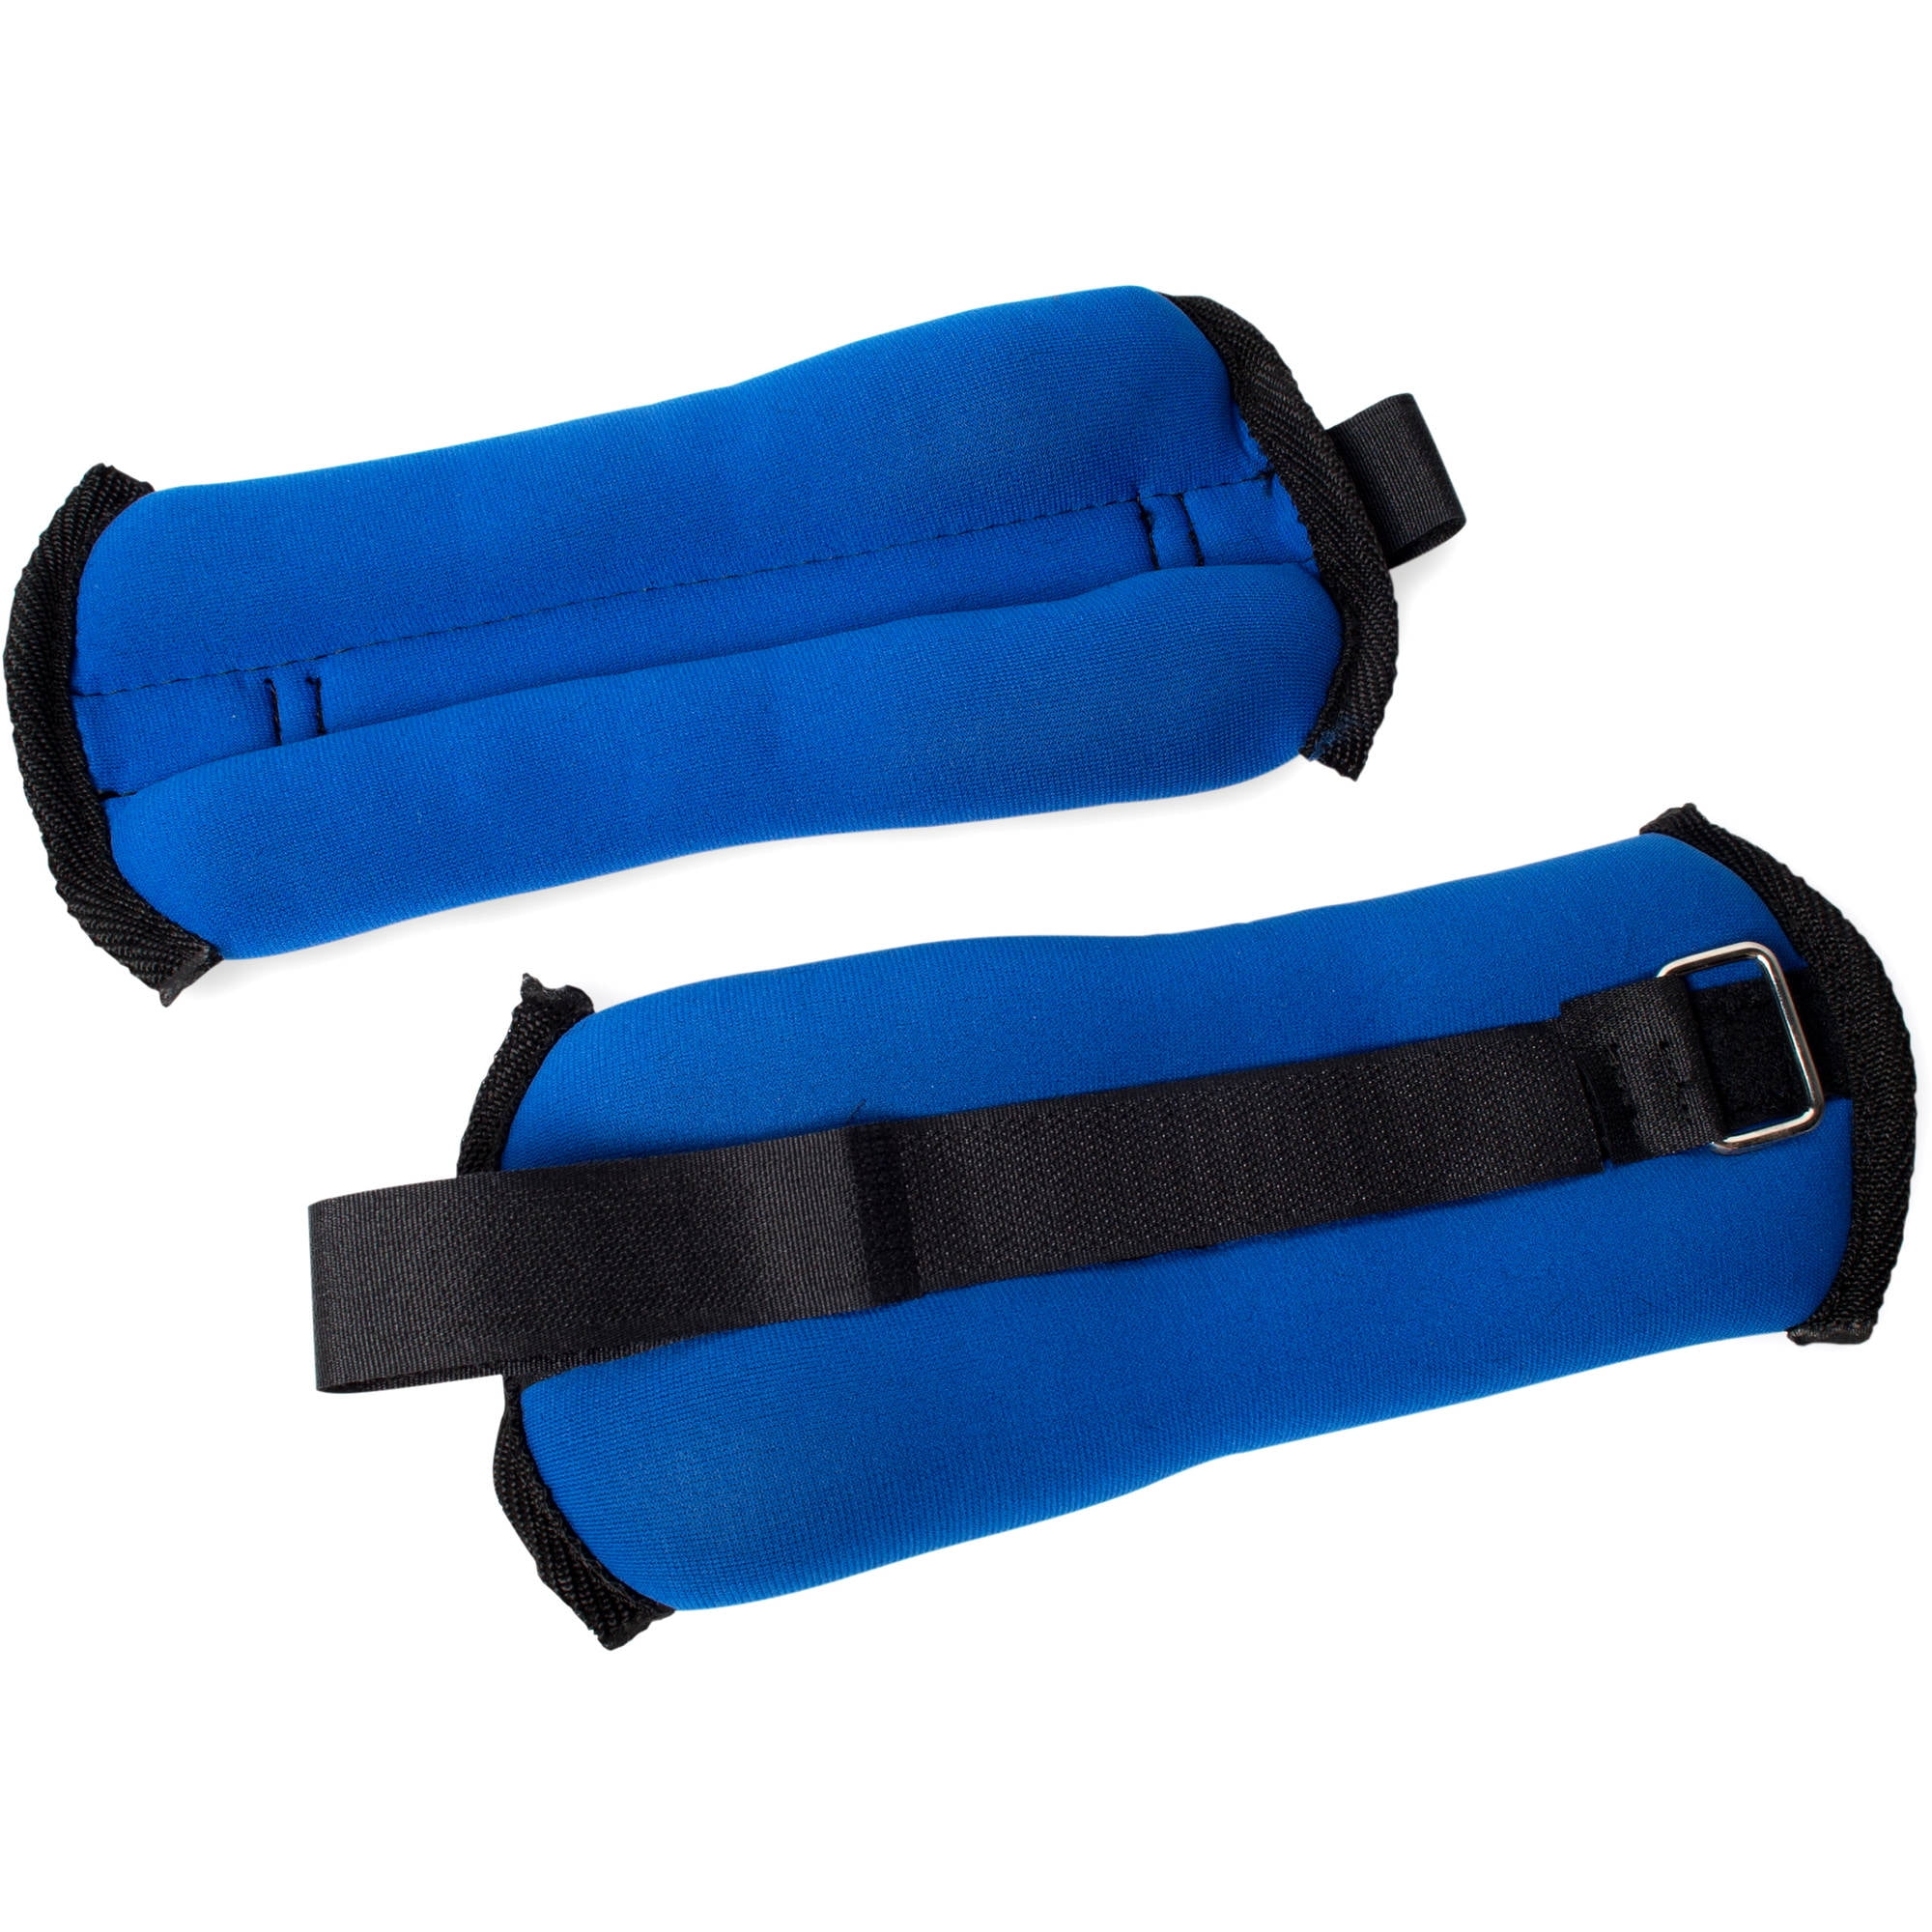 Pair 5 Lb Water Gear Ankle Weights